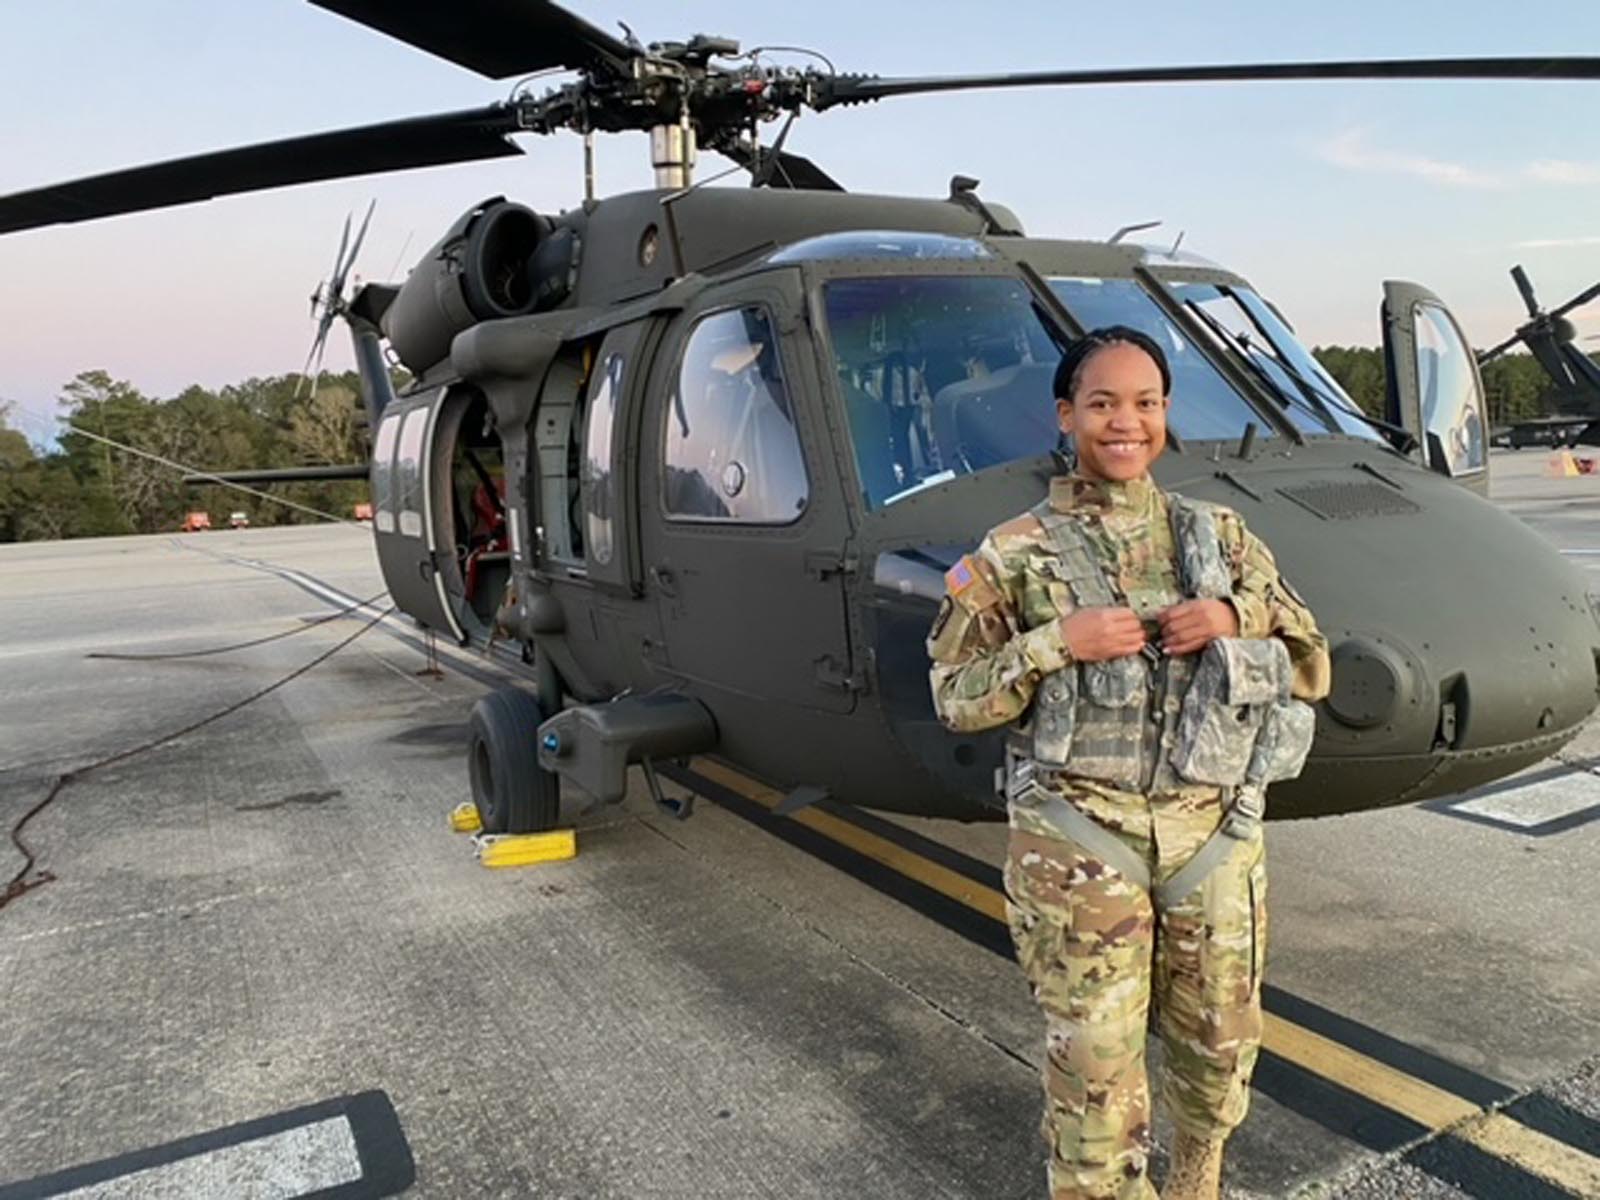 La. Army National Guard commissions first Black female pilot